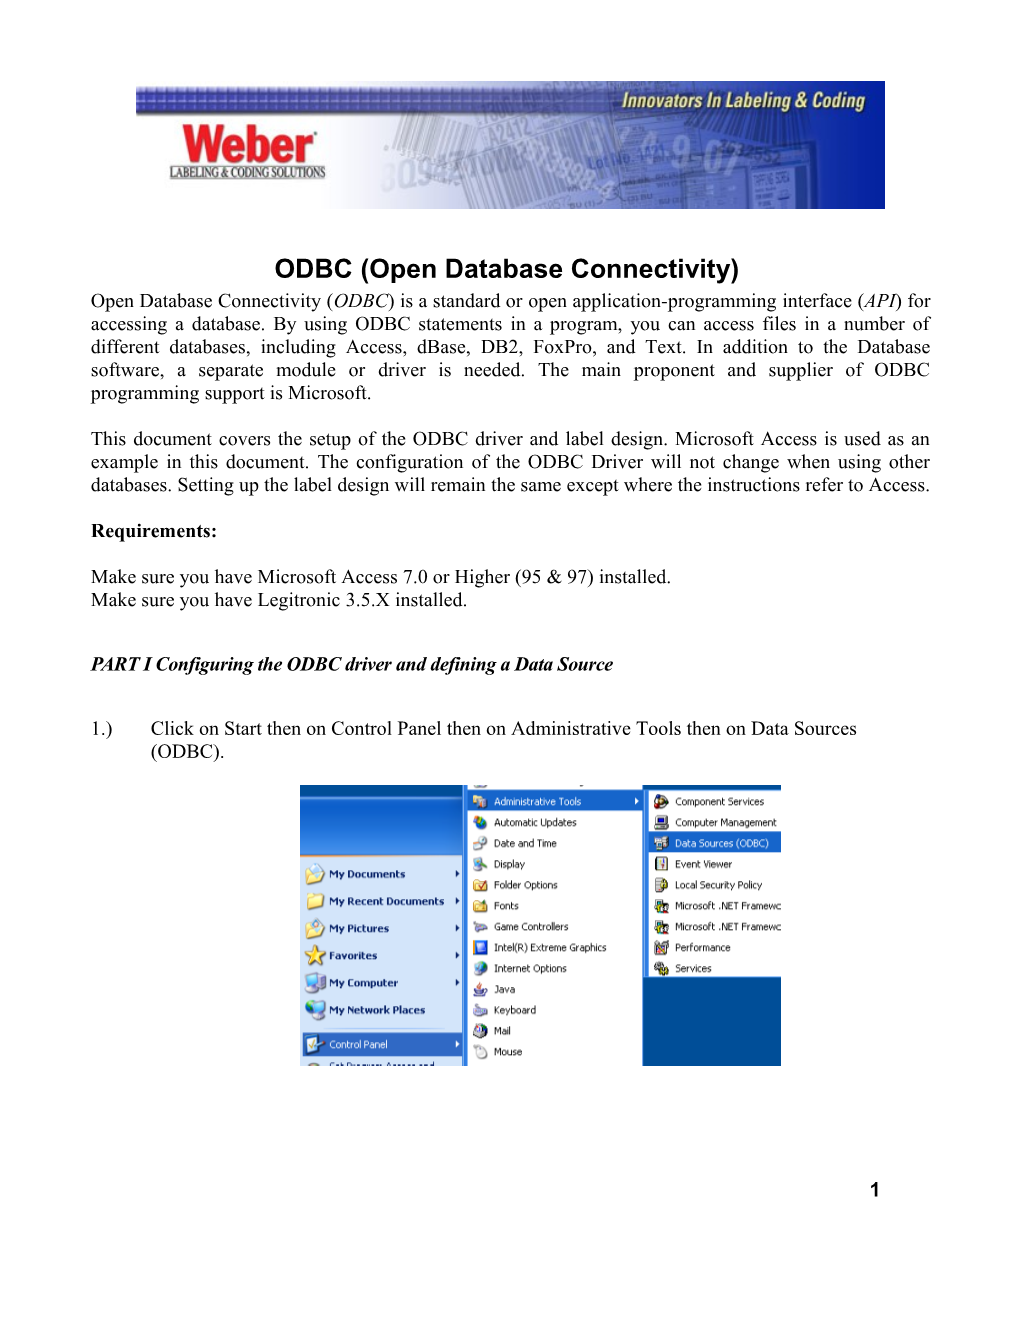 ODBC (Open Database Connectivity)